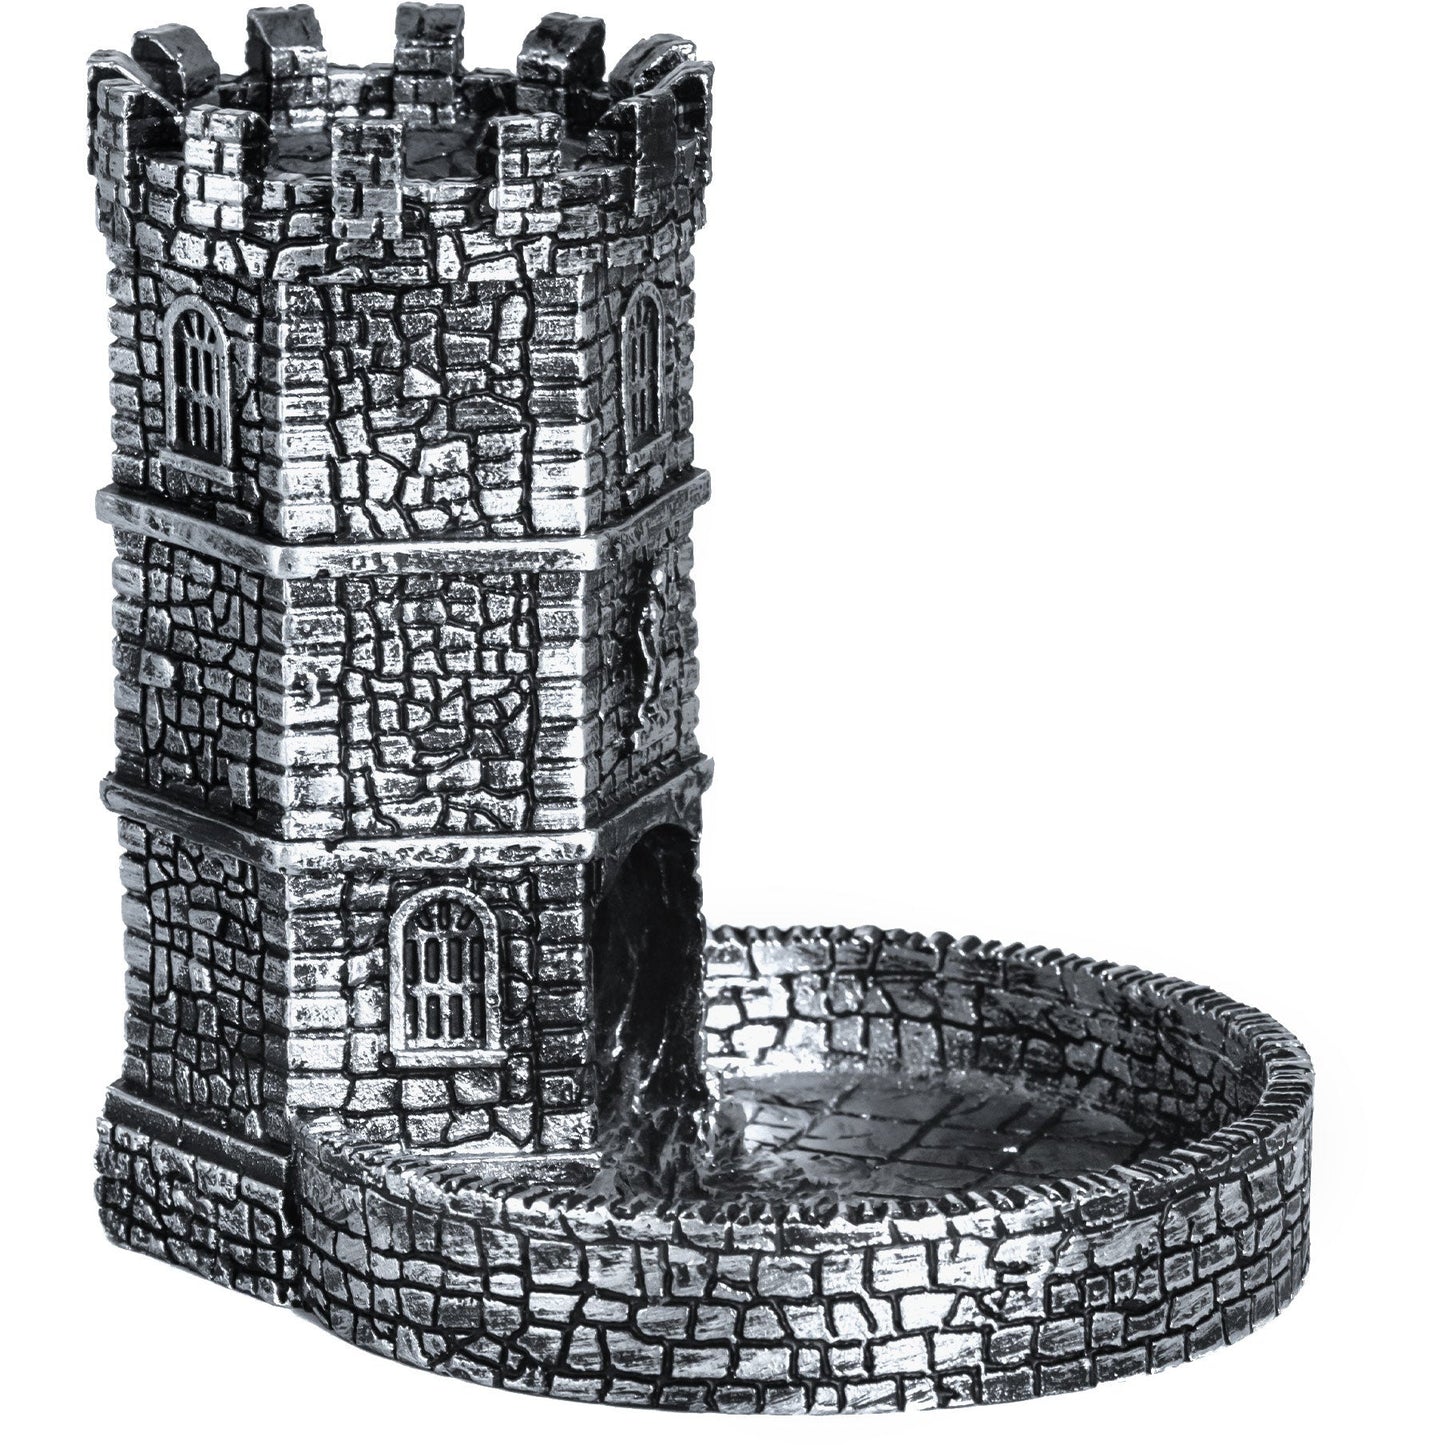 shining grey wizard dice tower on white background